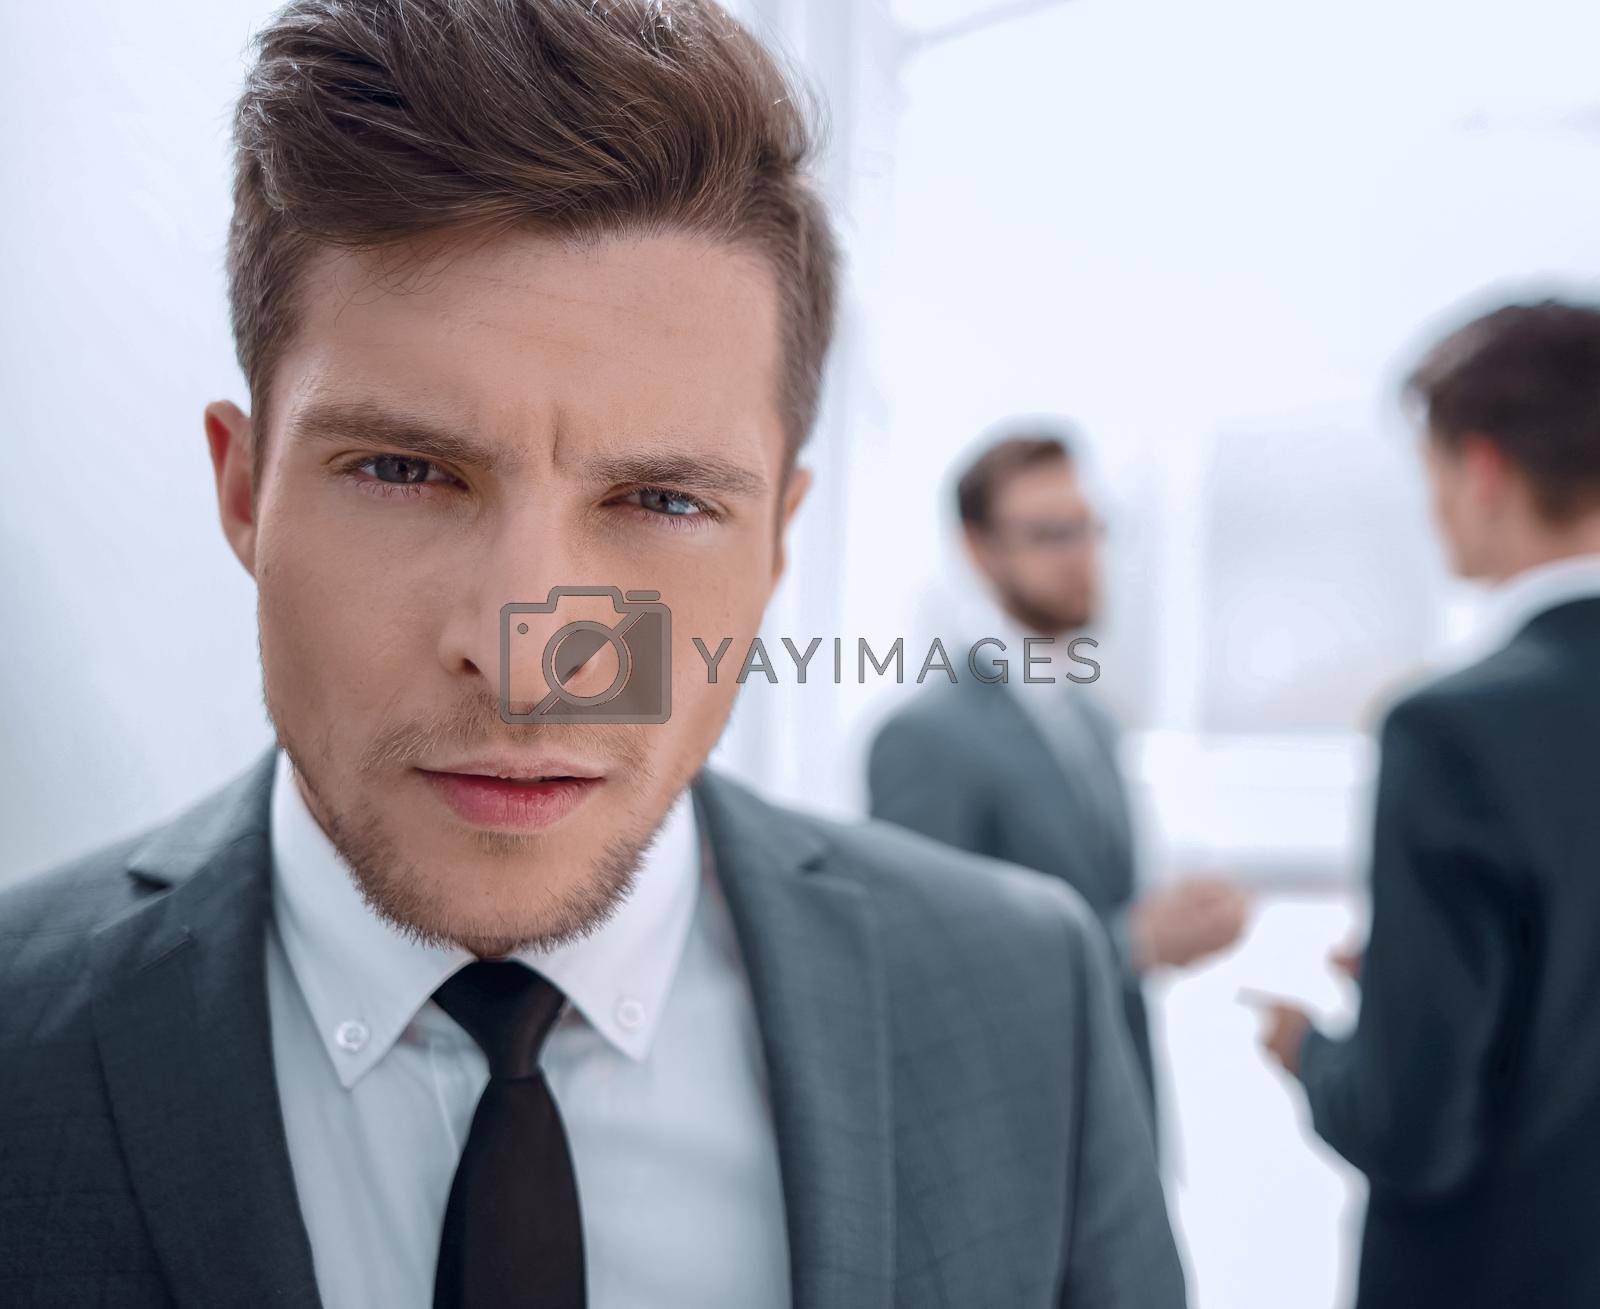 Royalty free image of close up.portrait of a serious young businessman by asdf